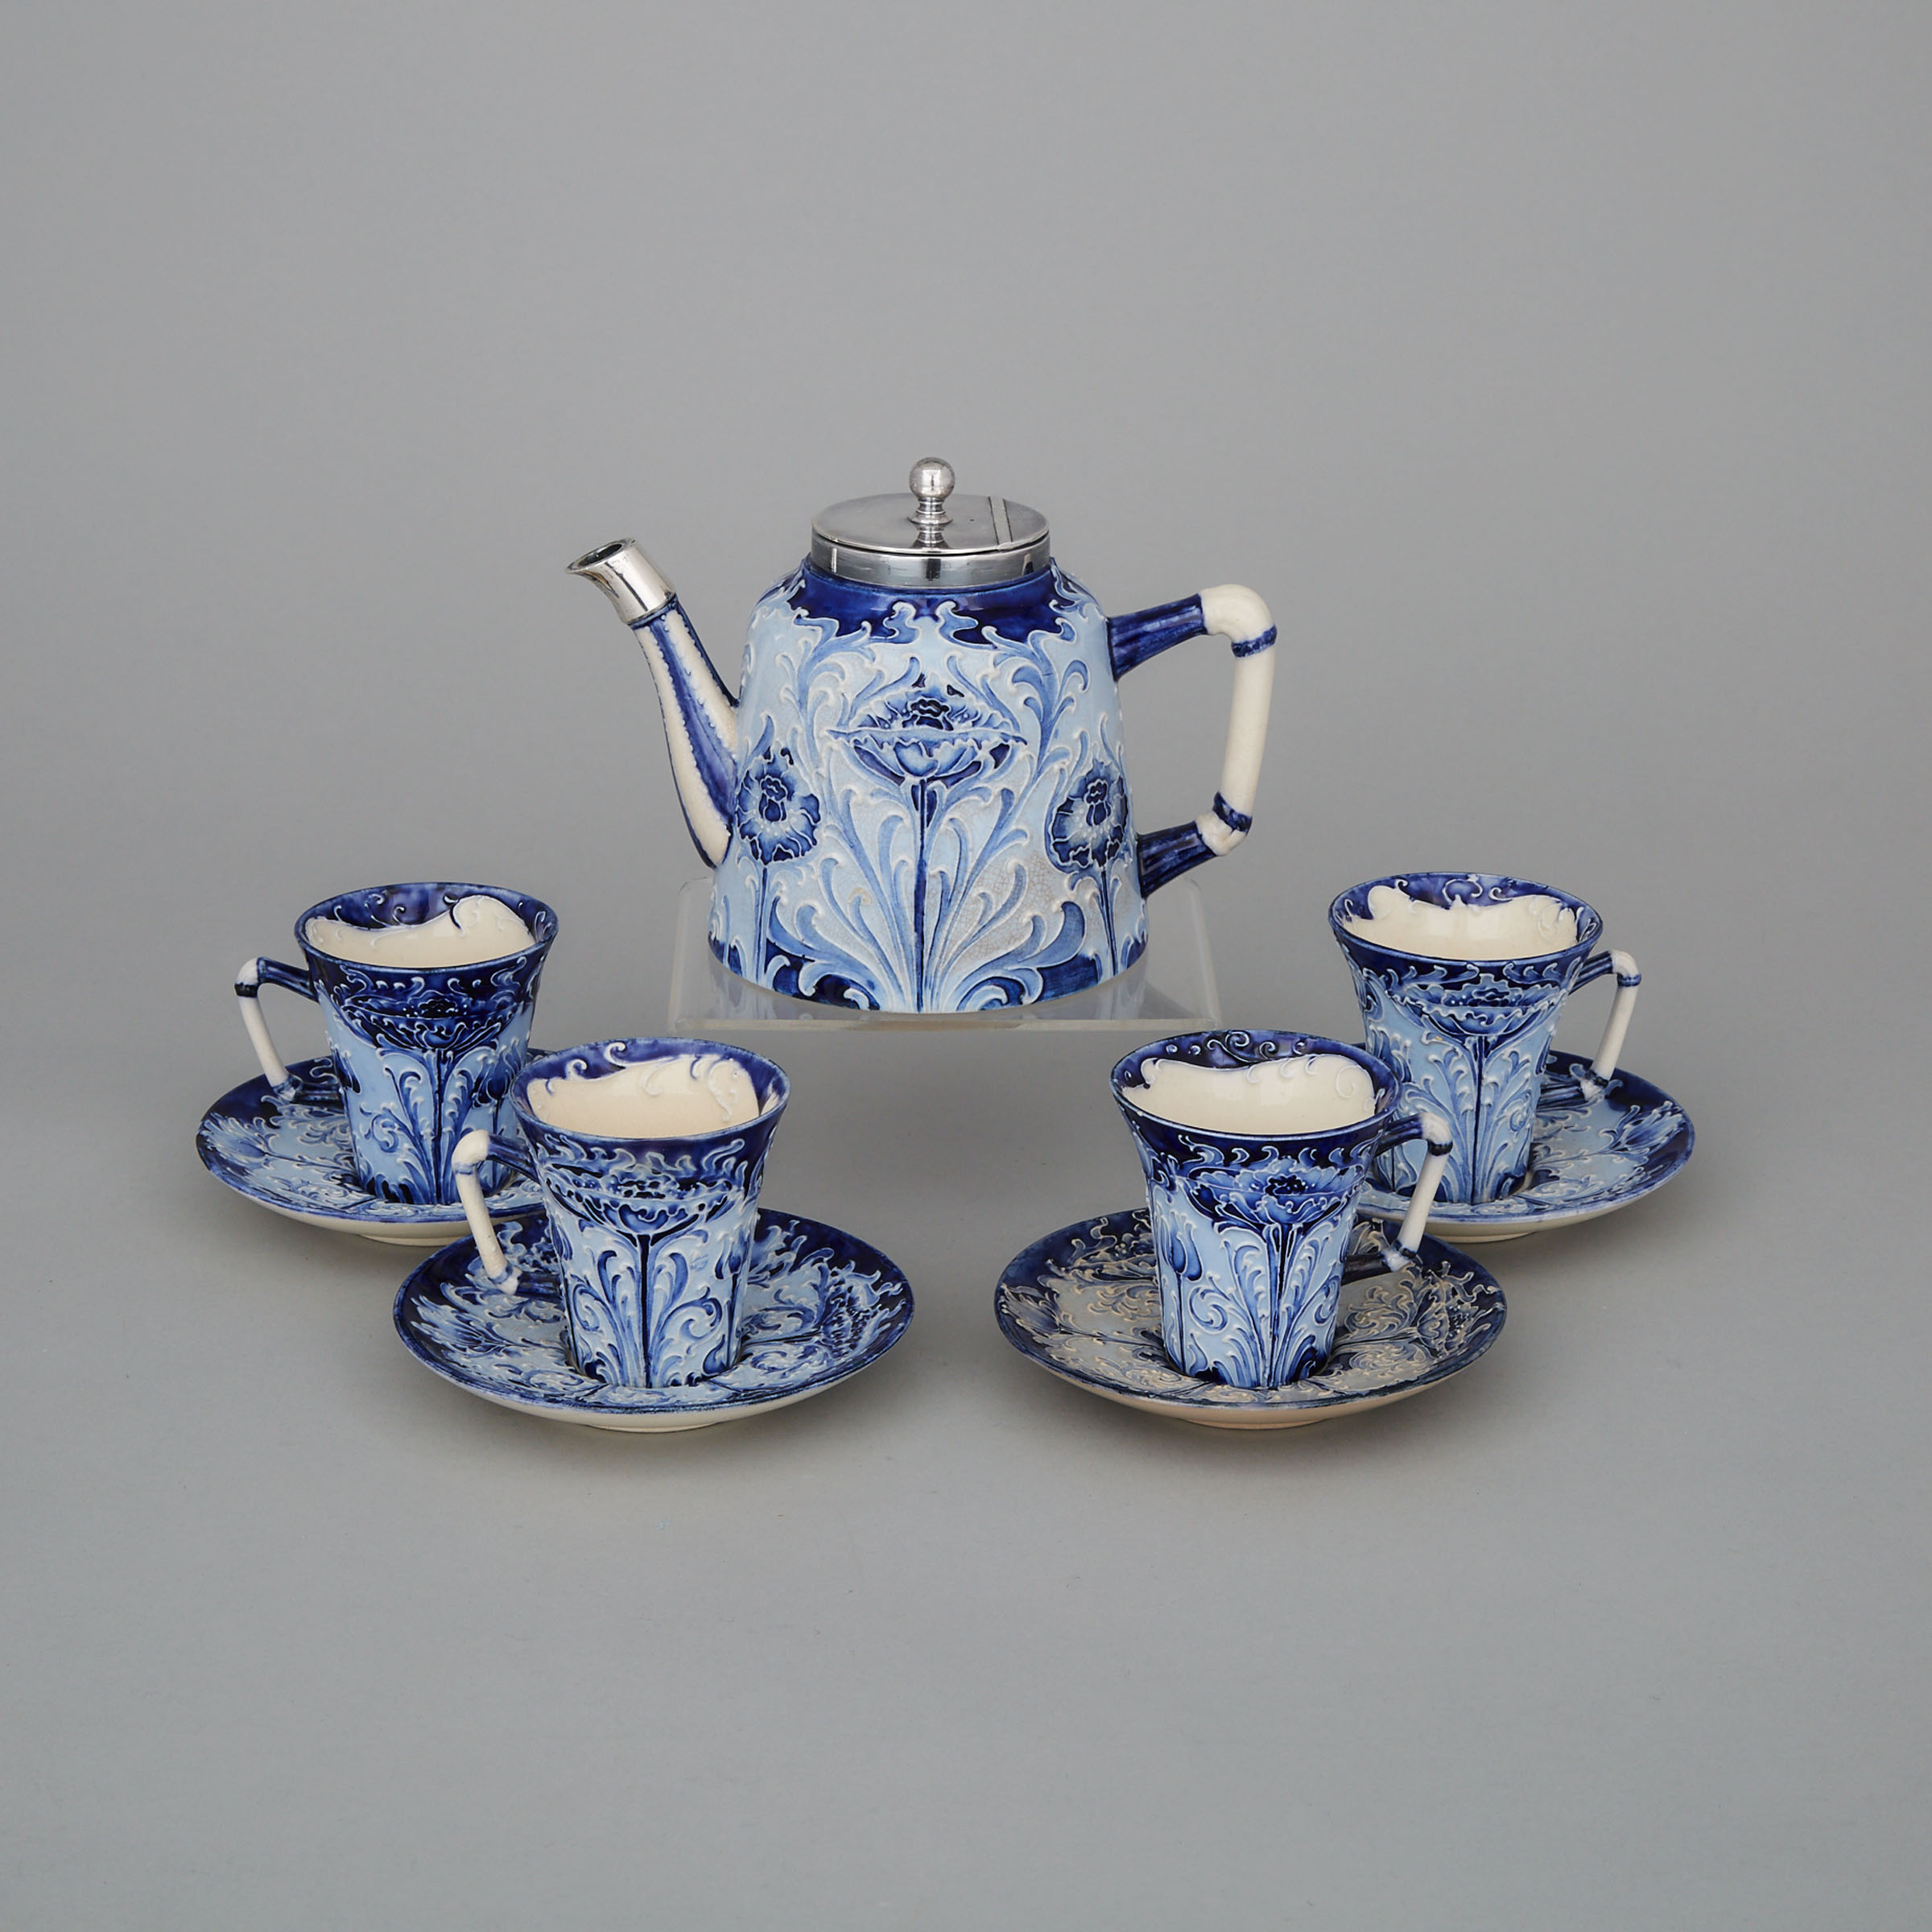 Macintyre Moorcroft Florian Poppy Teapot with Four Cups and Saucers, c.1900